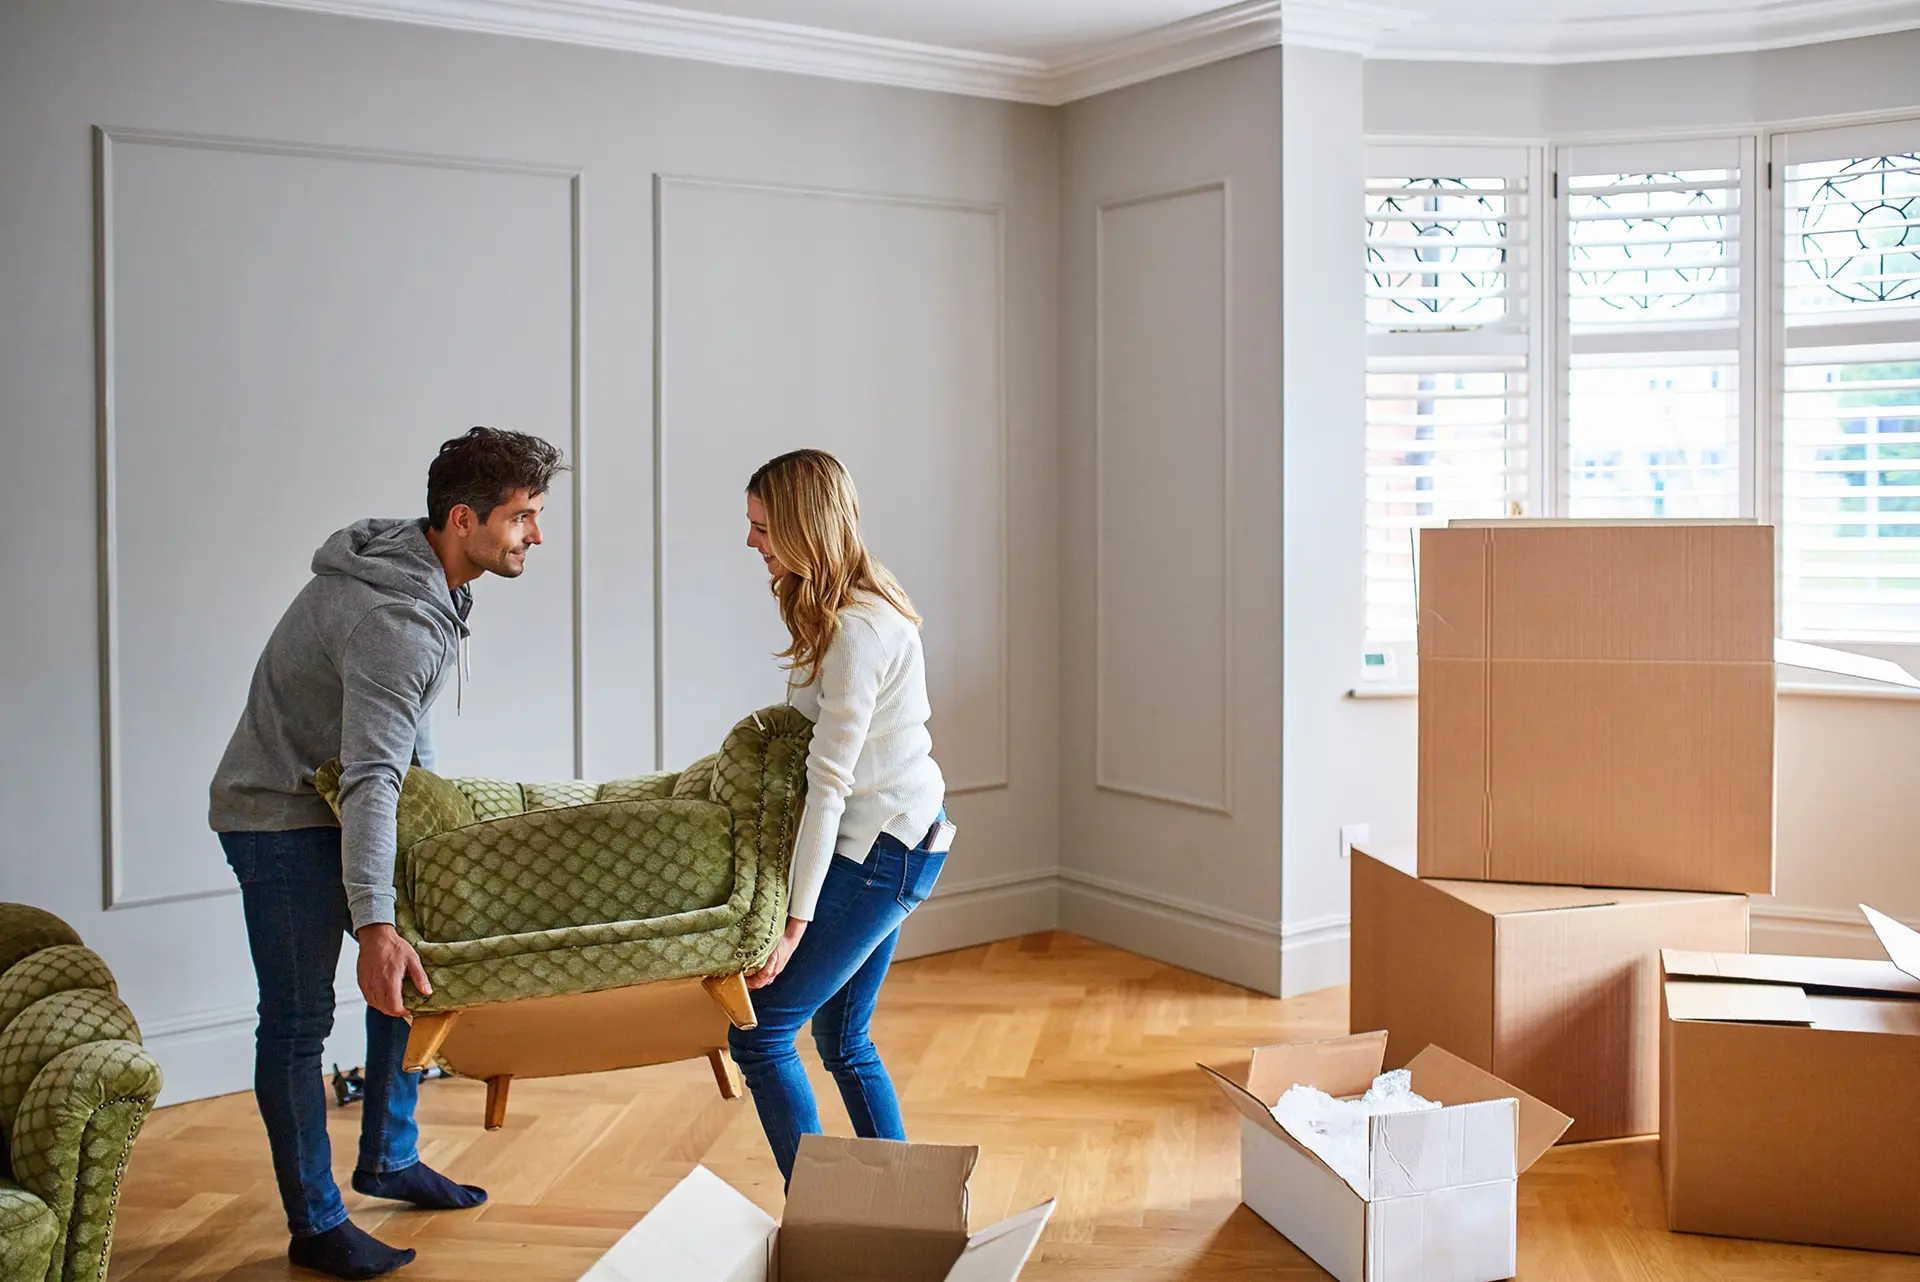 Home Movers & Remortgage